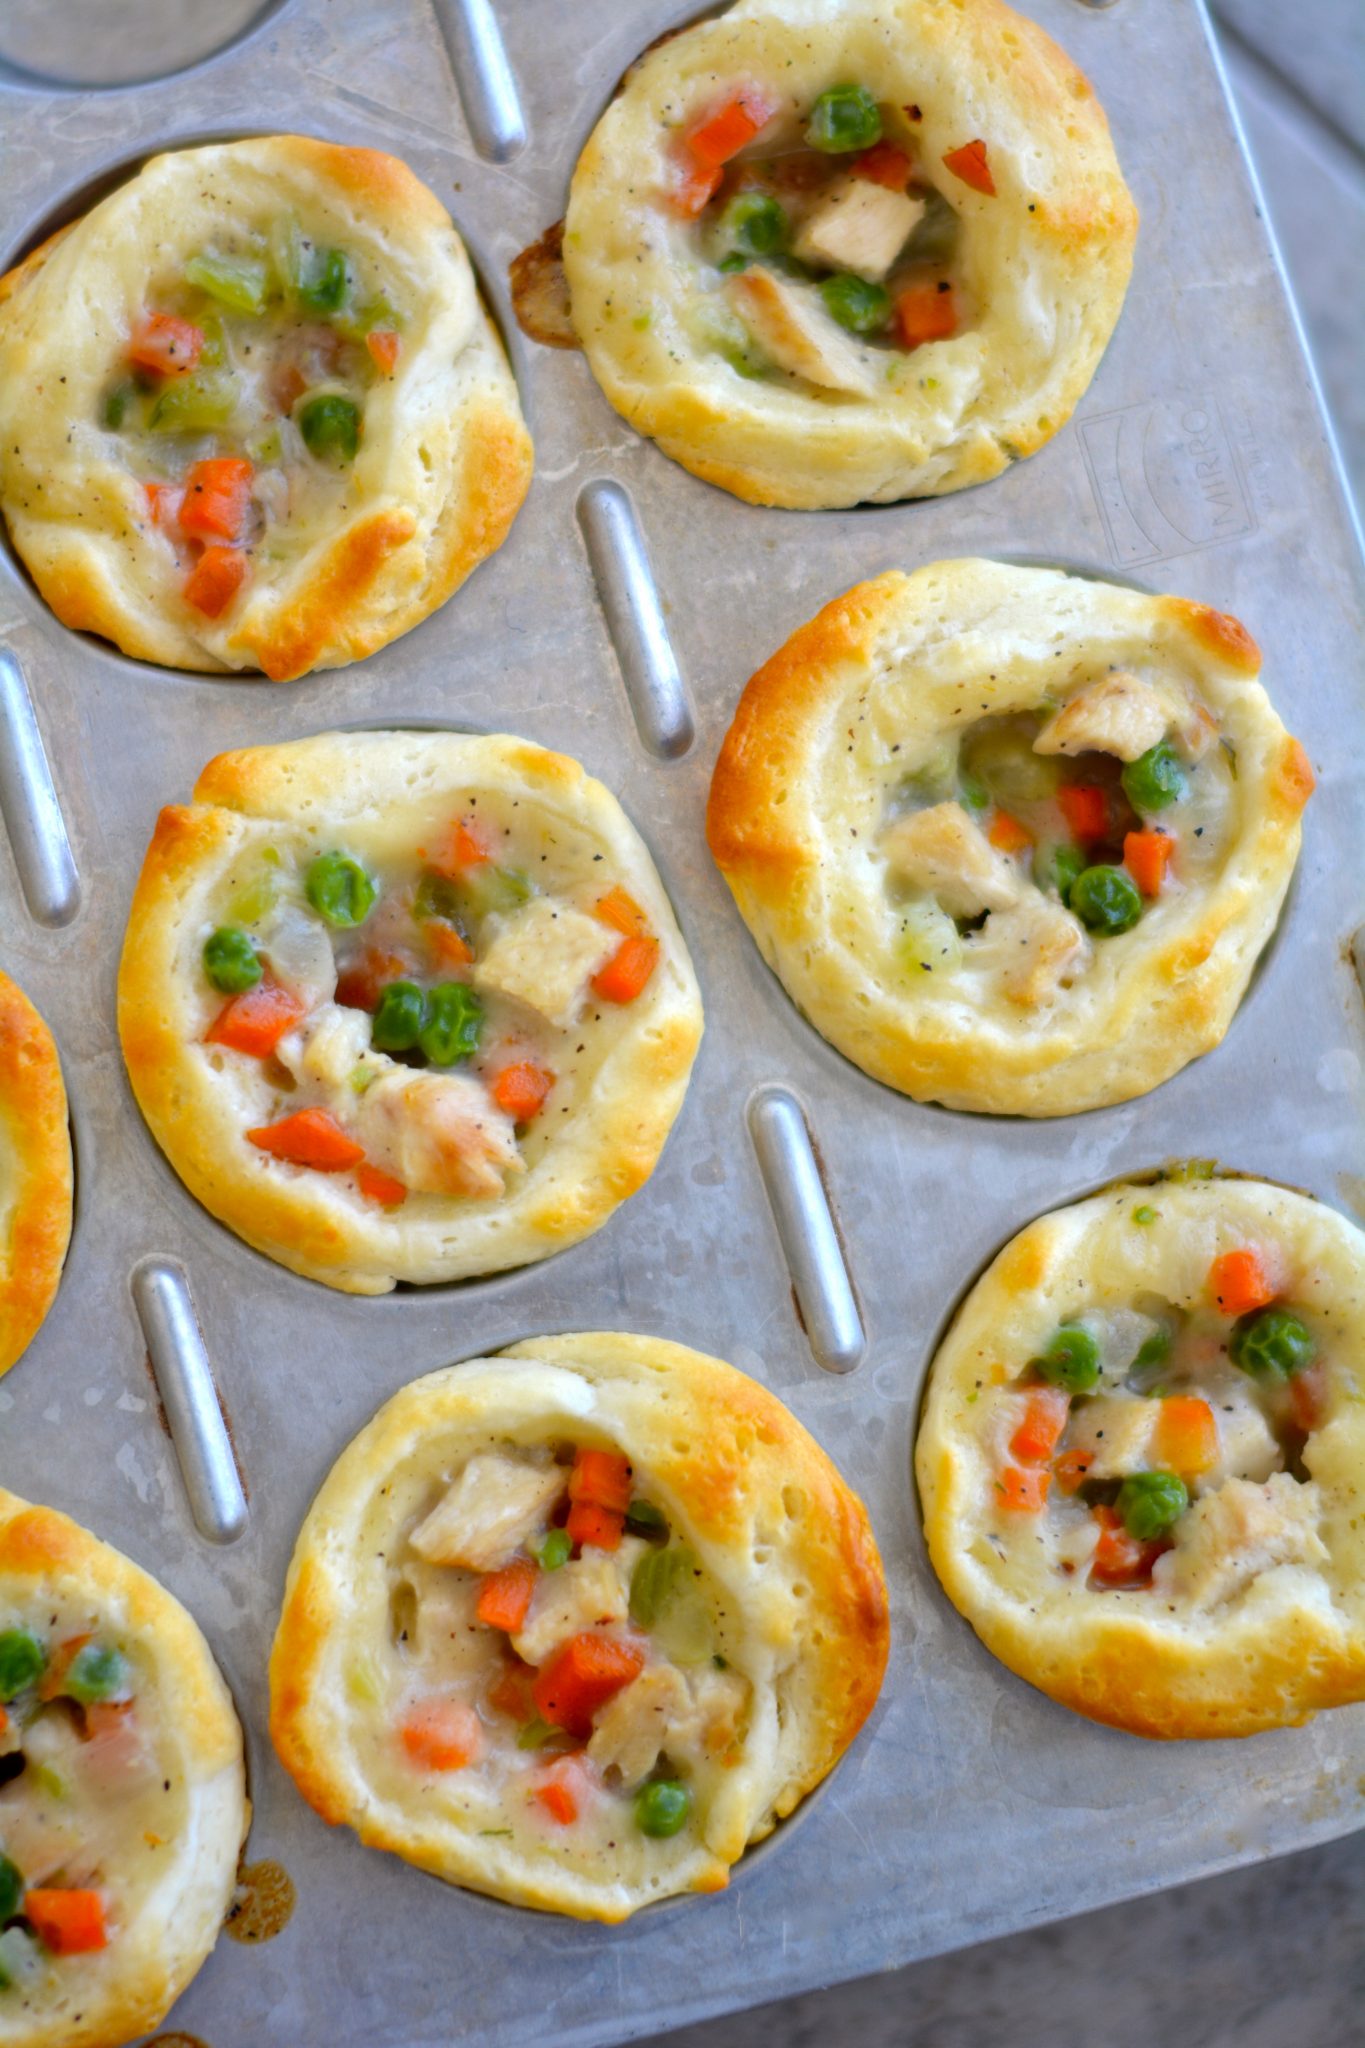 mini chicken pot pie bites just out of the oven